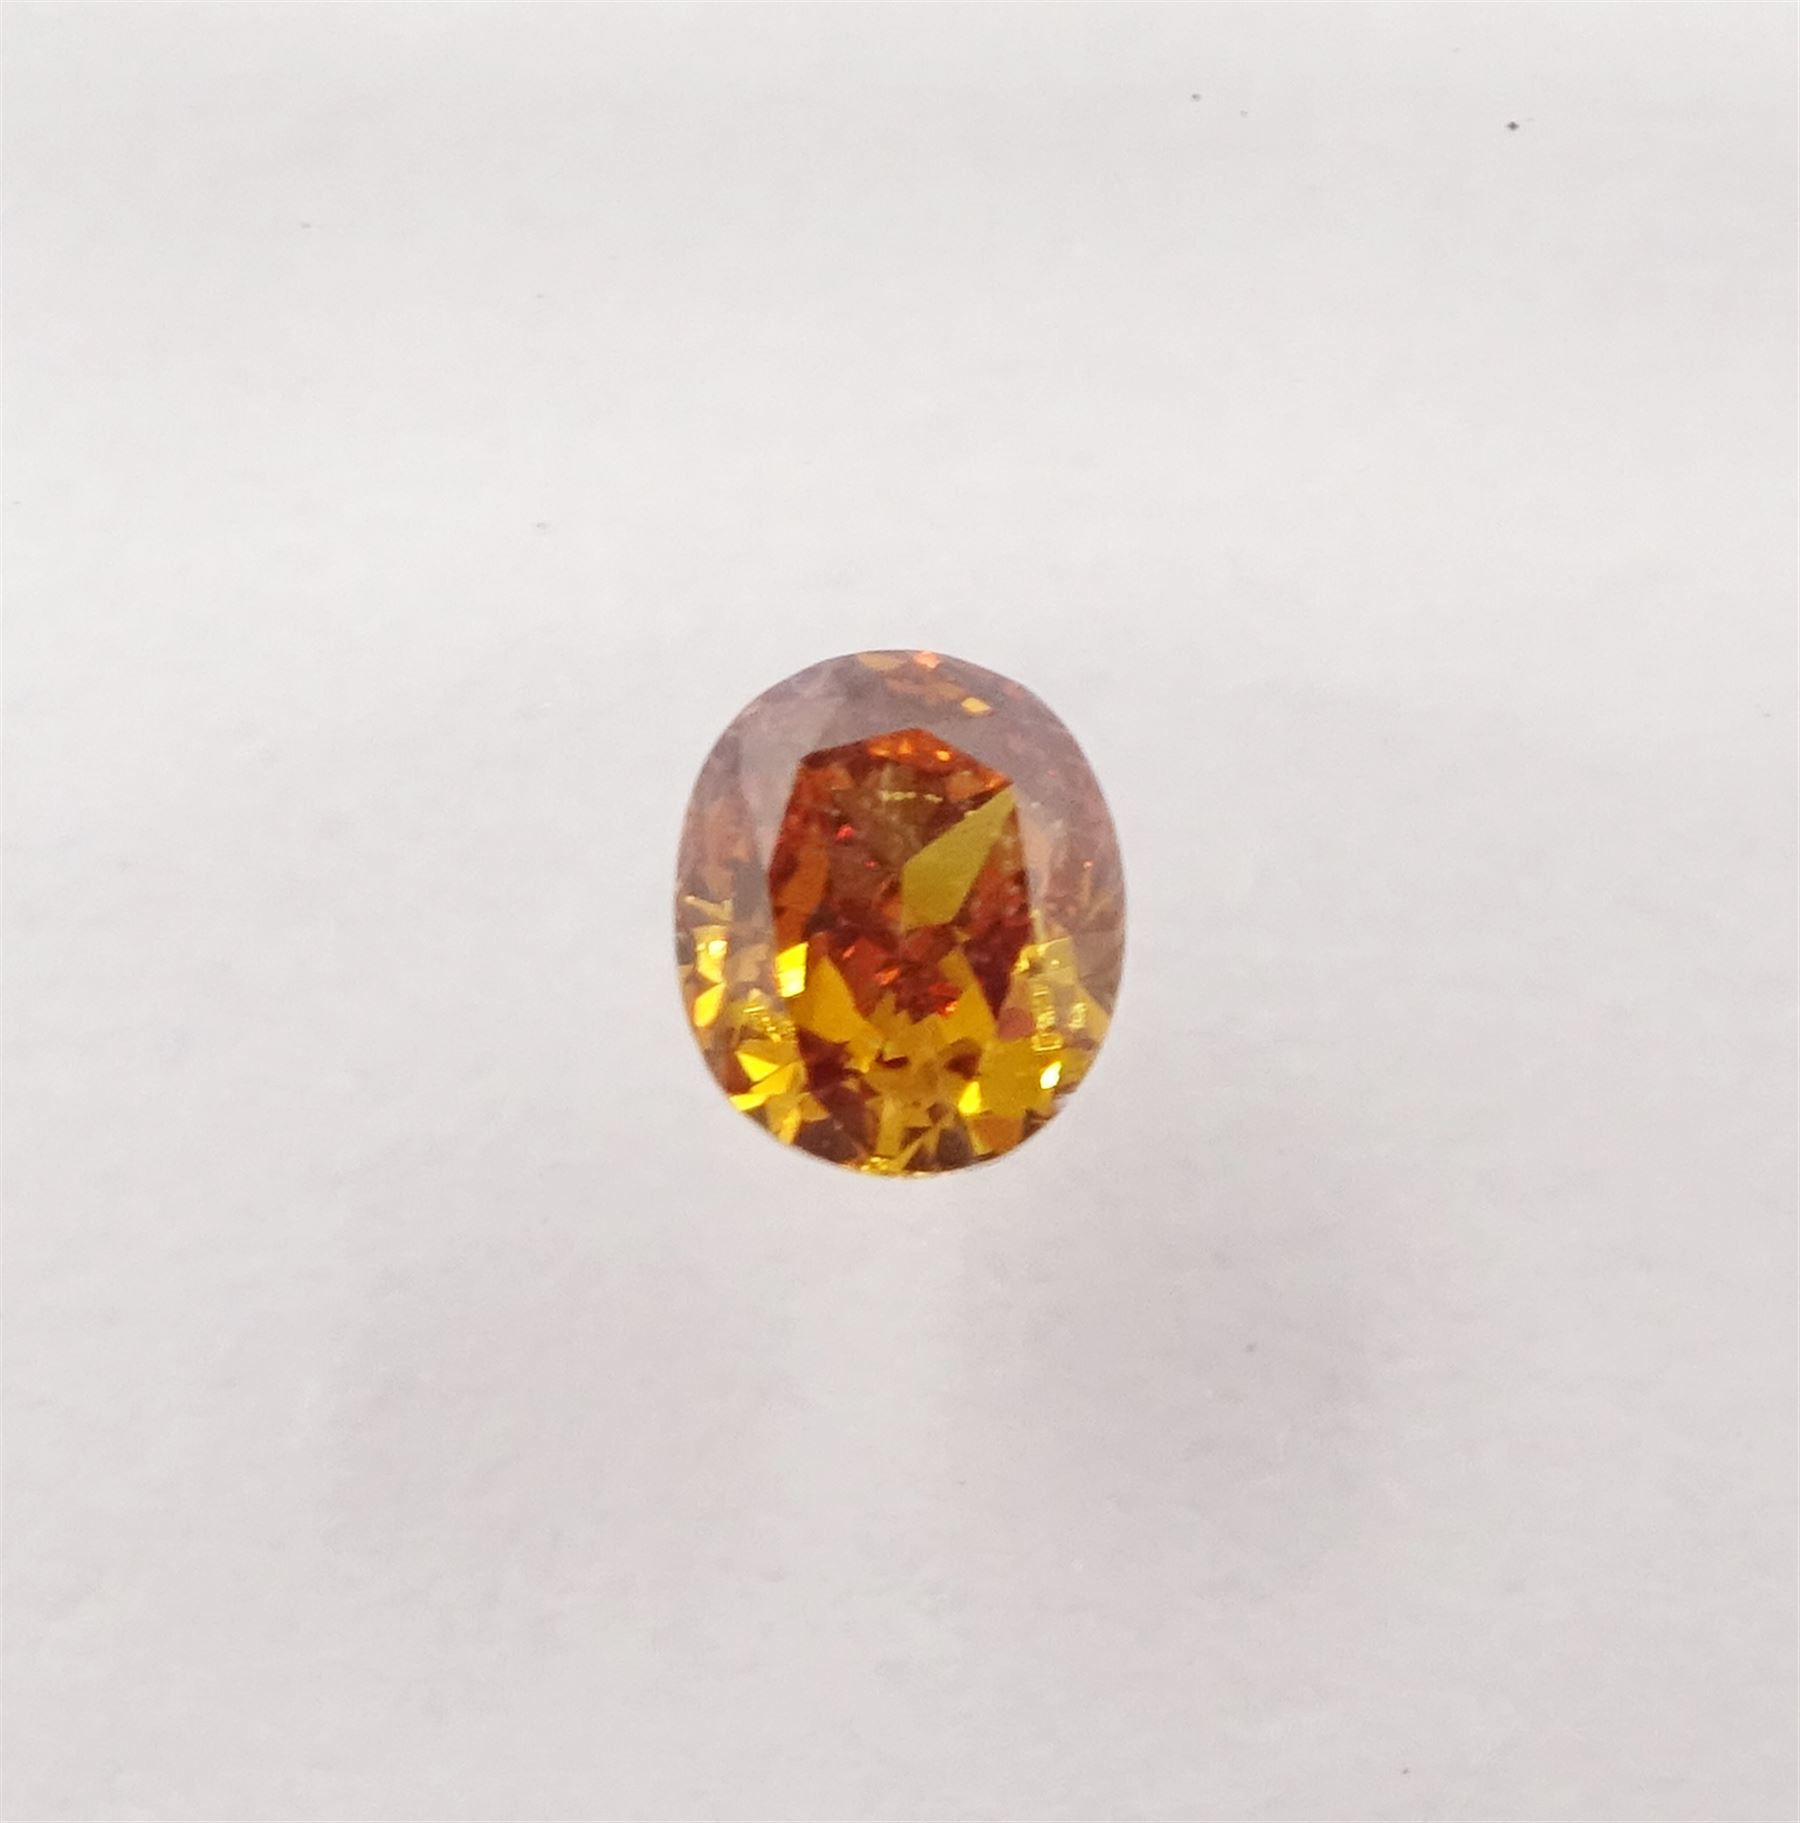 Two certified loose fancy coloured oval shaped diamonds - Image 4 of 6